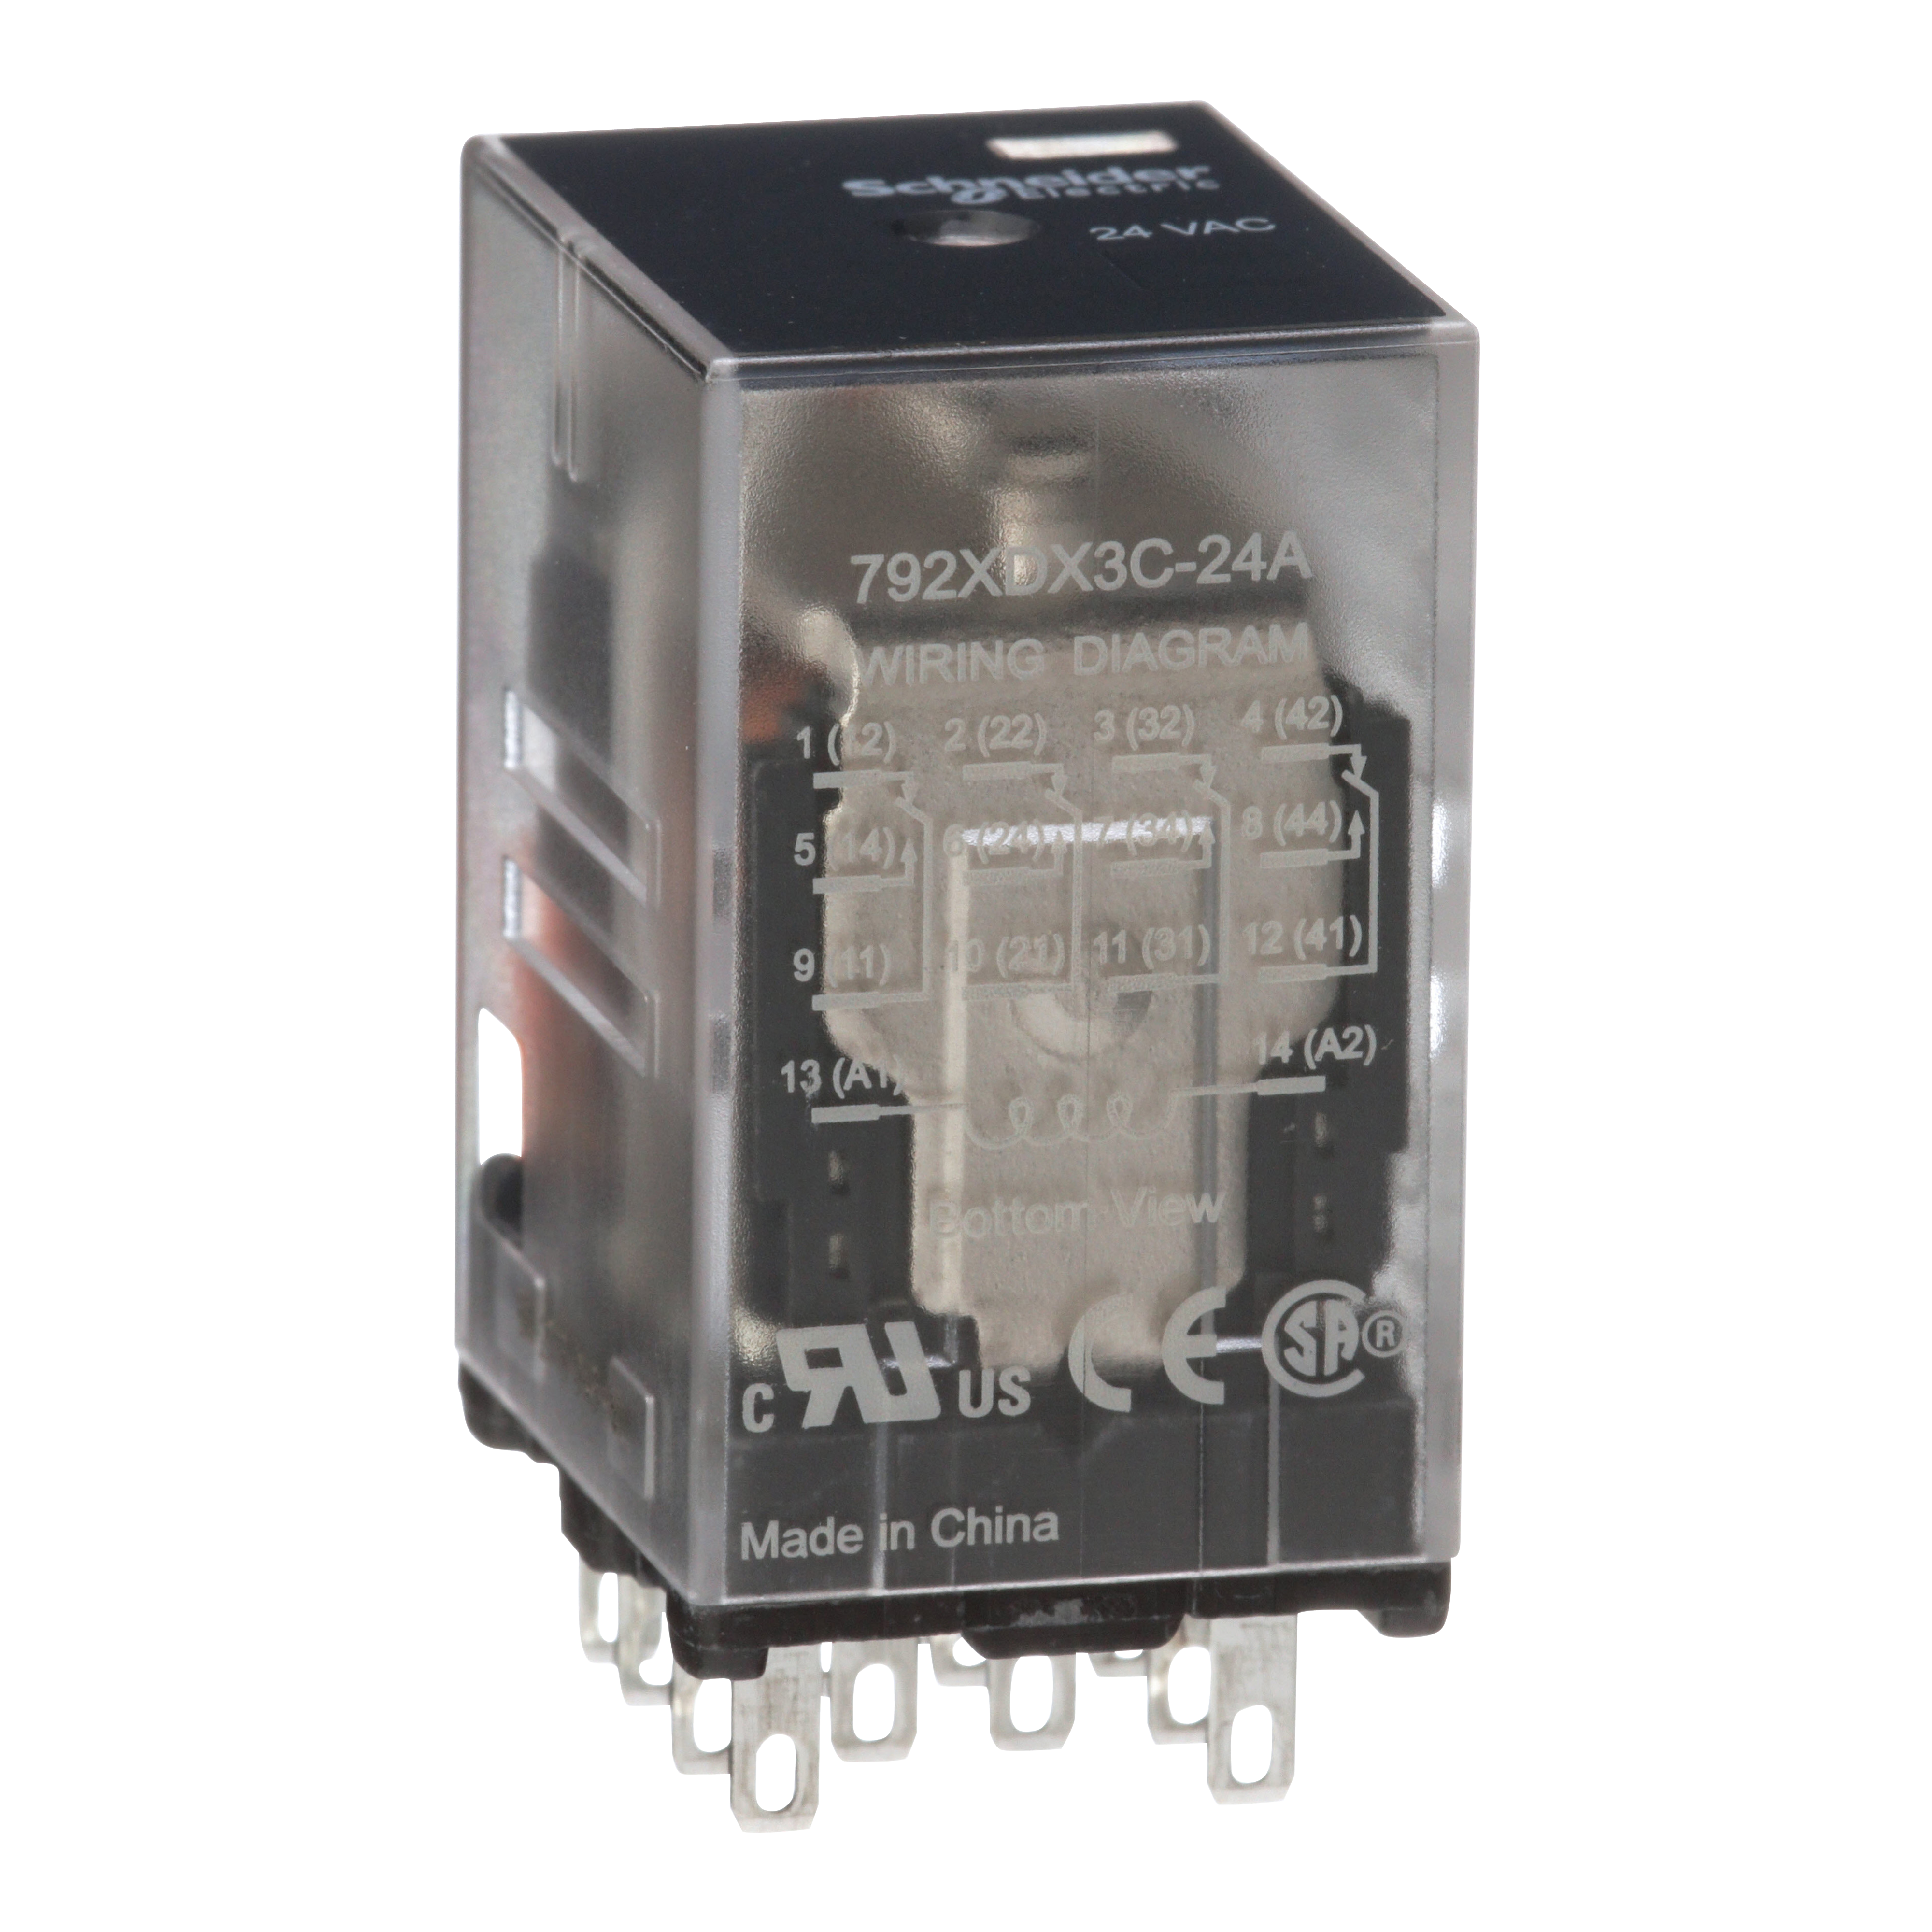 Power relay, SE Relays, 4PDT, 3A, 24 VAC, low level bifurcated contacts, clear cover